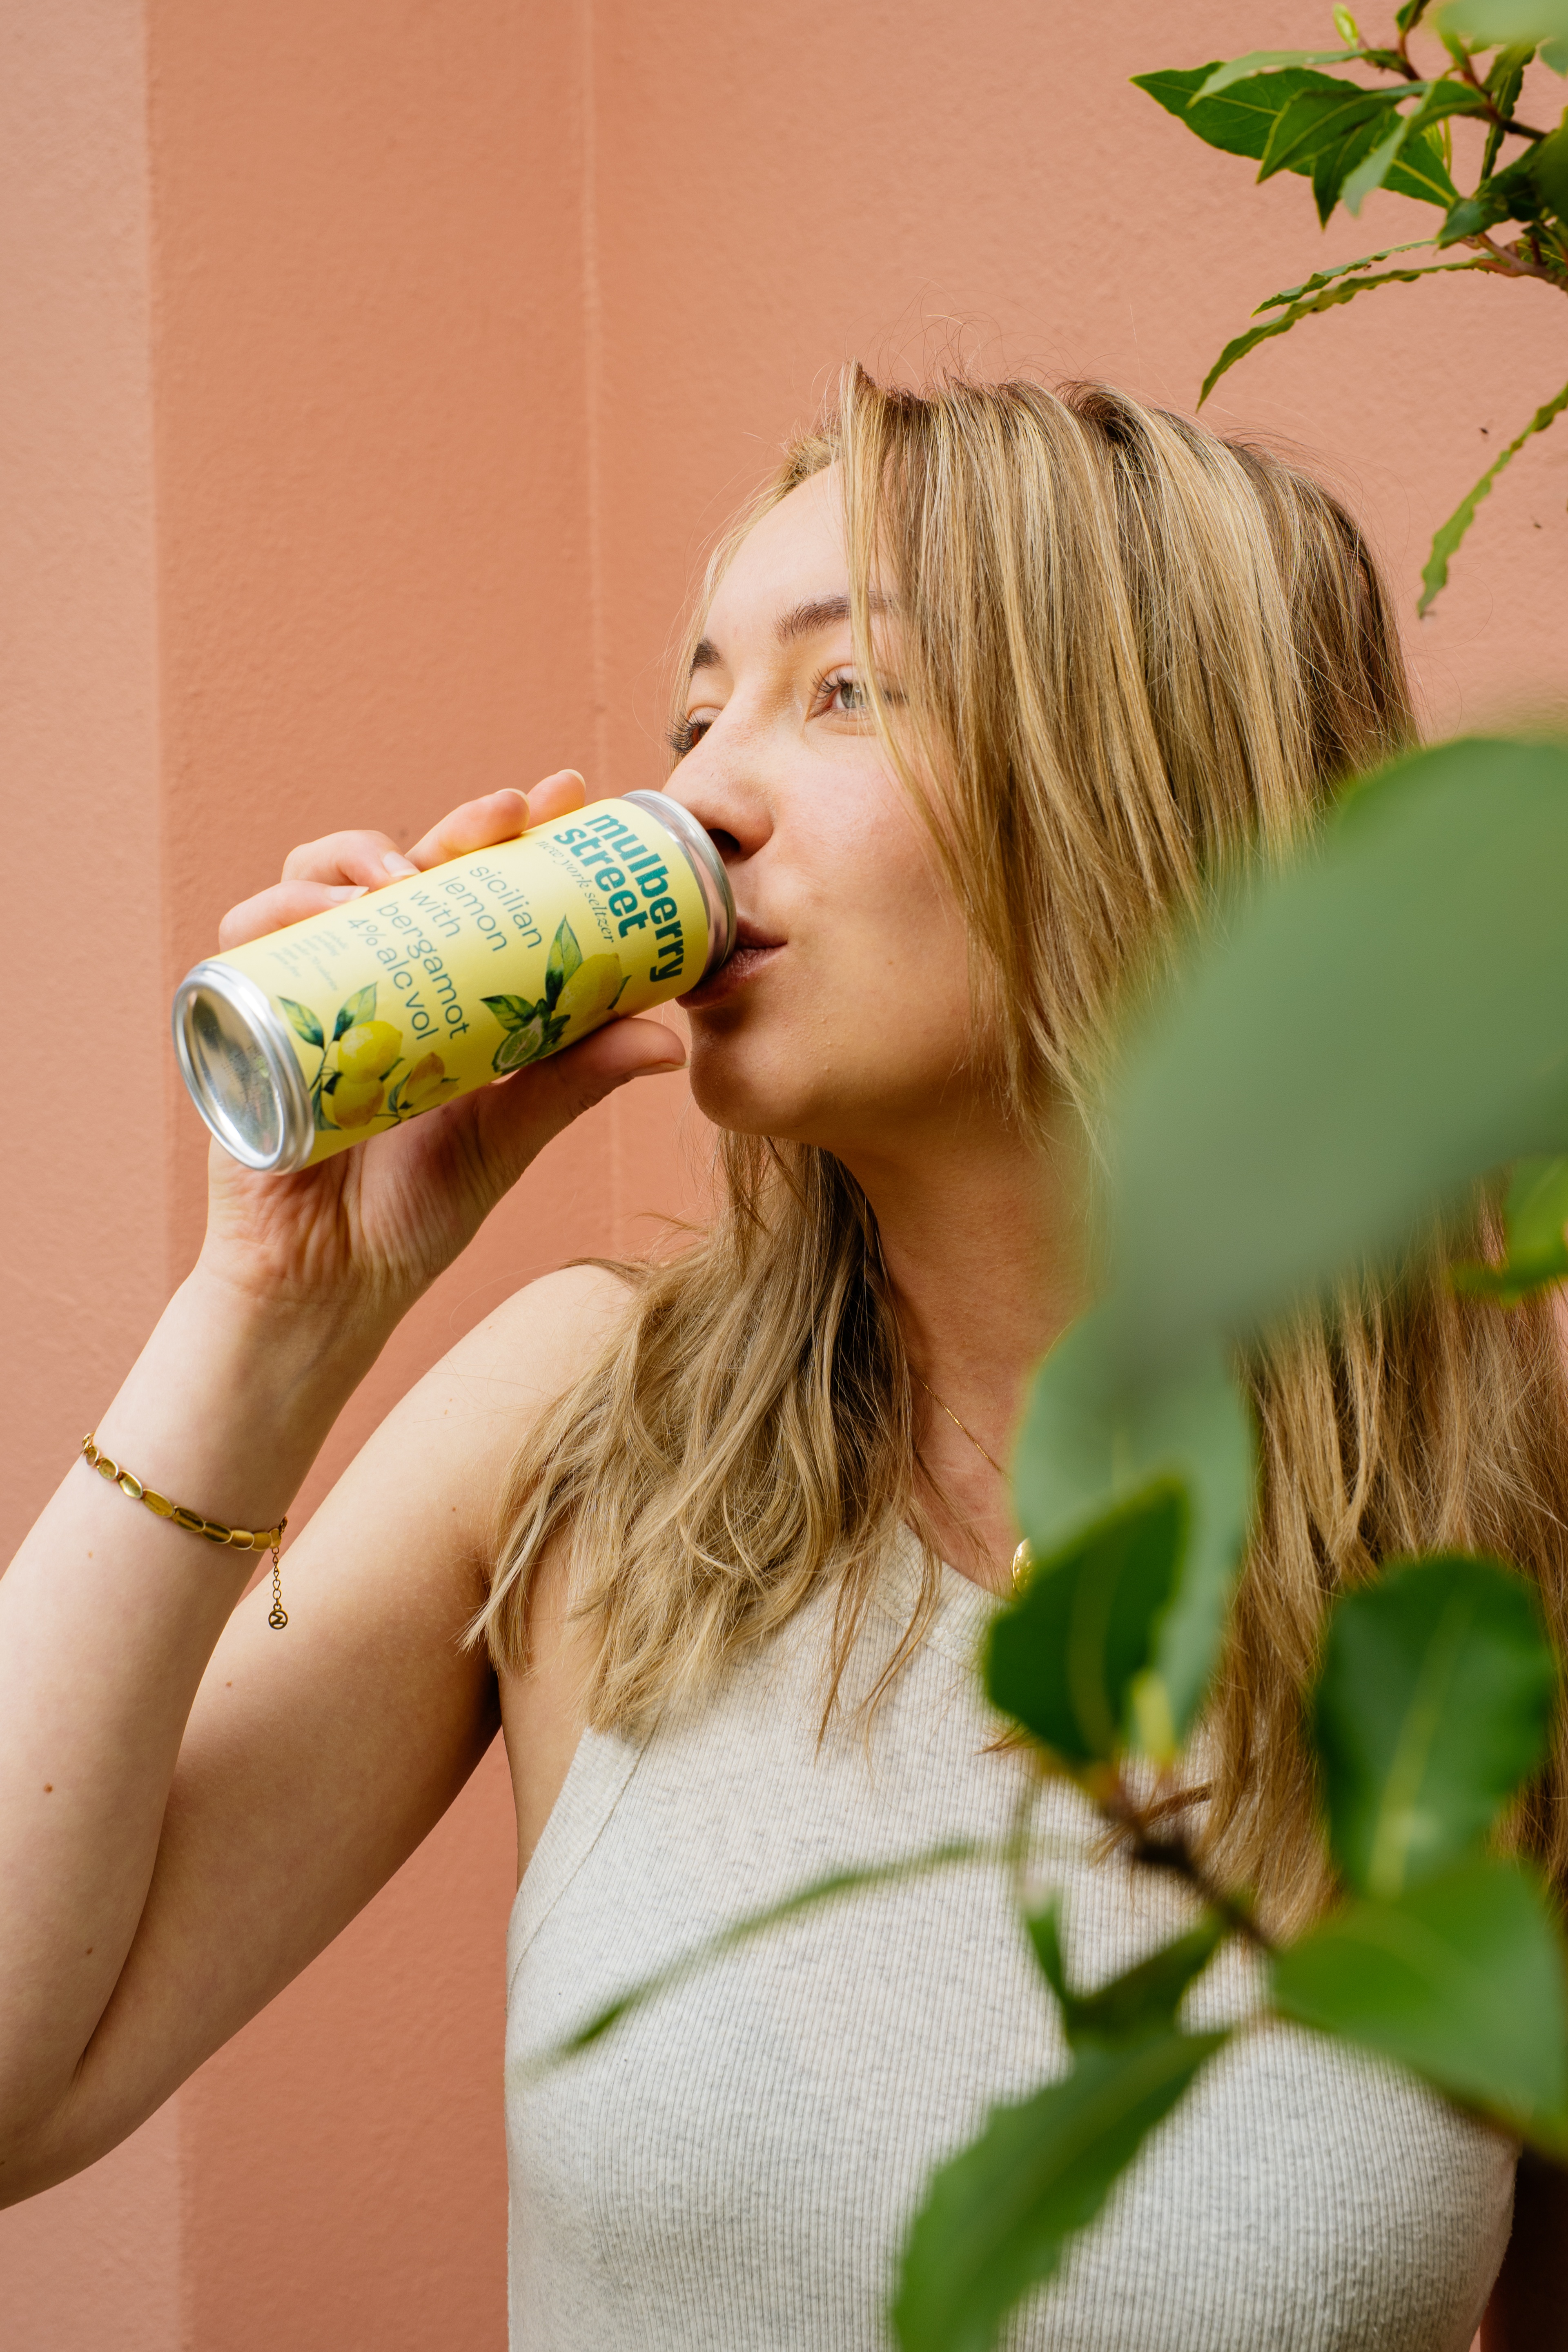 A person drinking from a can of Mulberry Street Lemon Seltzer